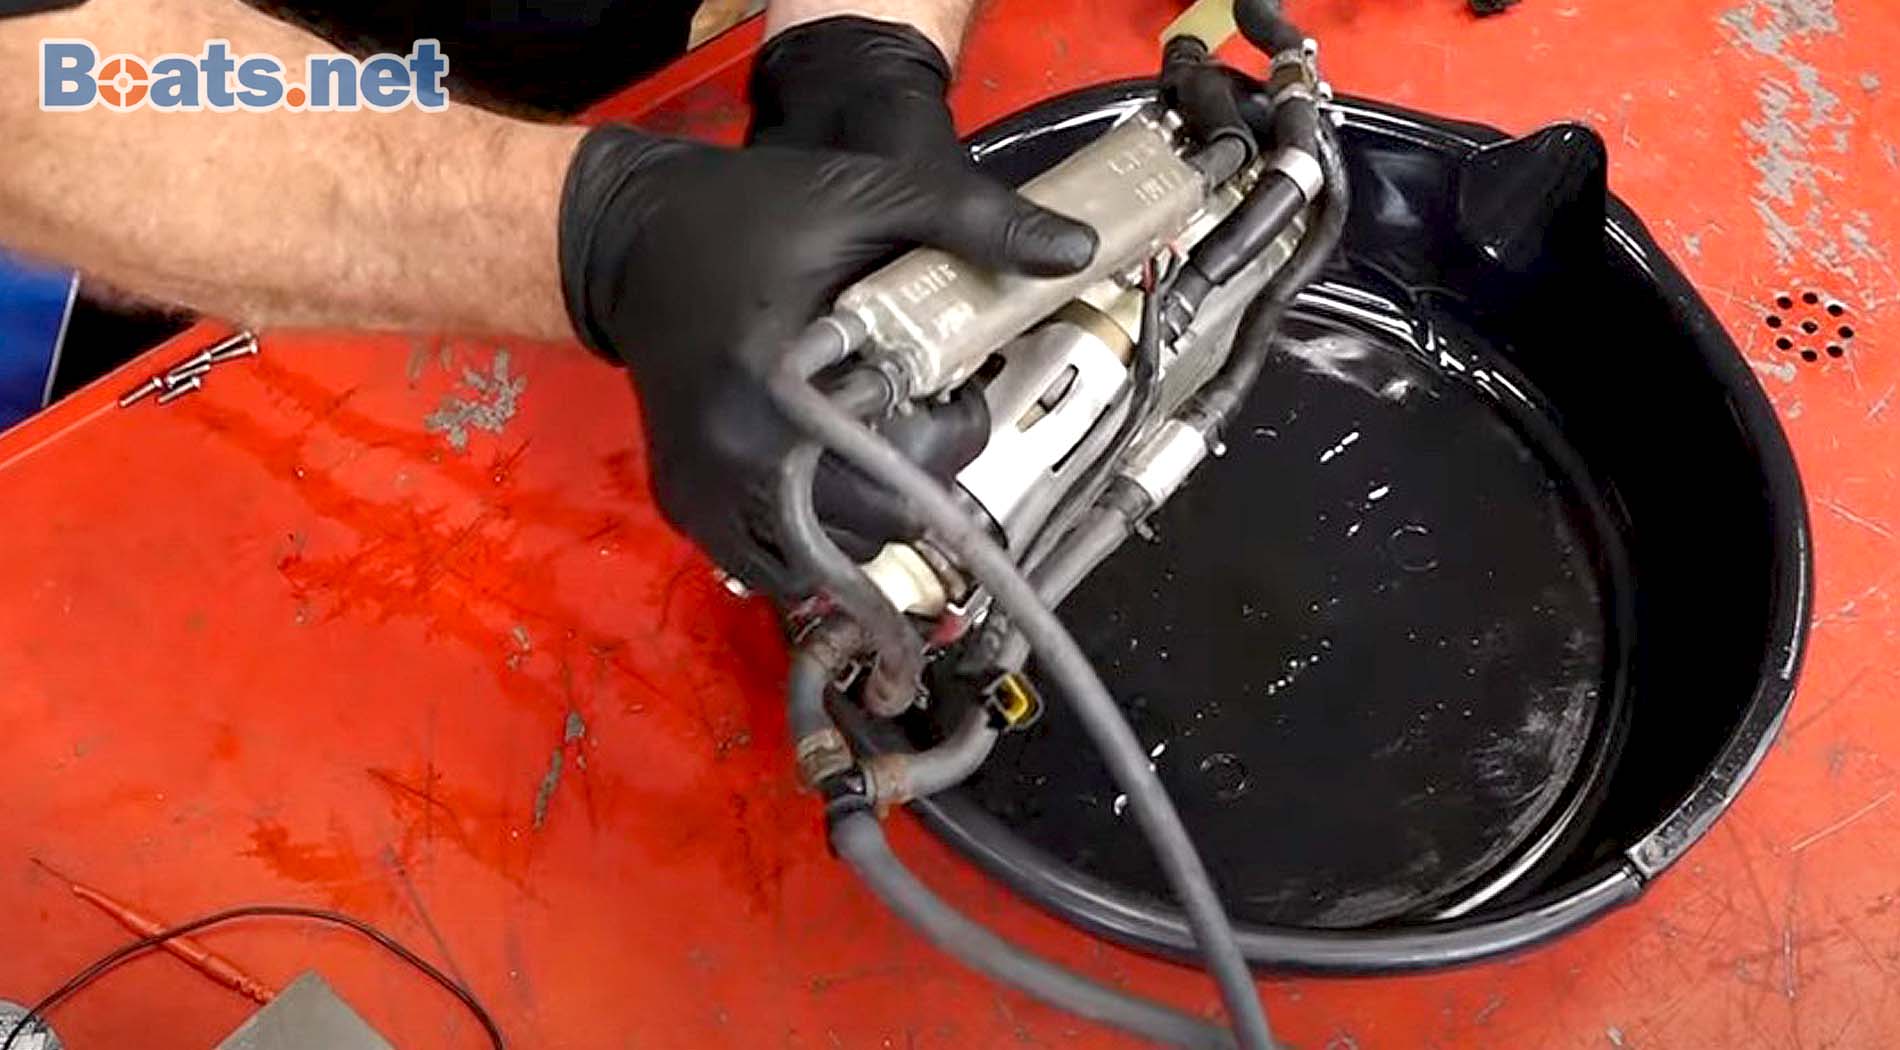 How to dewinterize an outboard motor VST tank